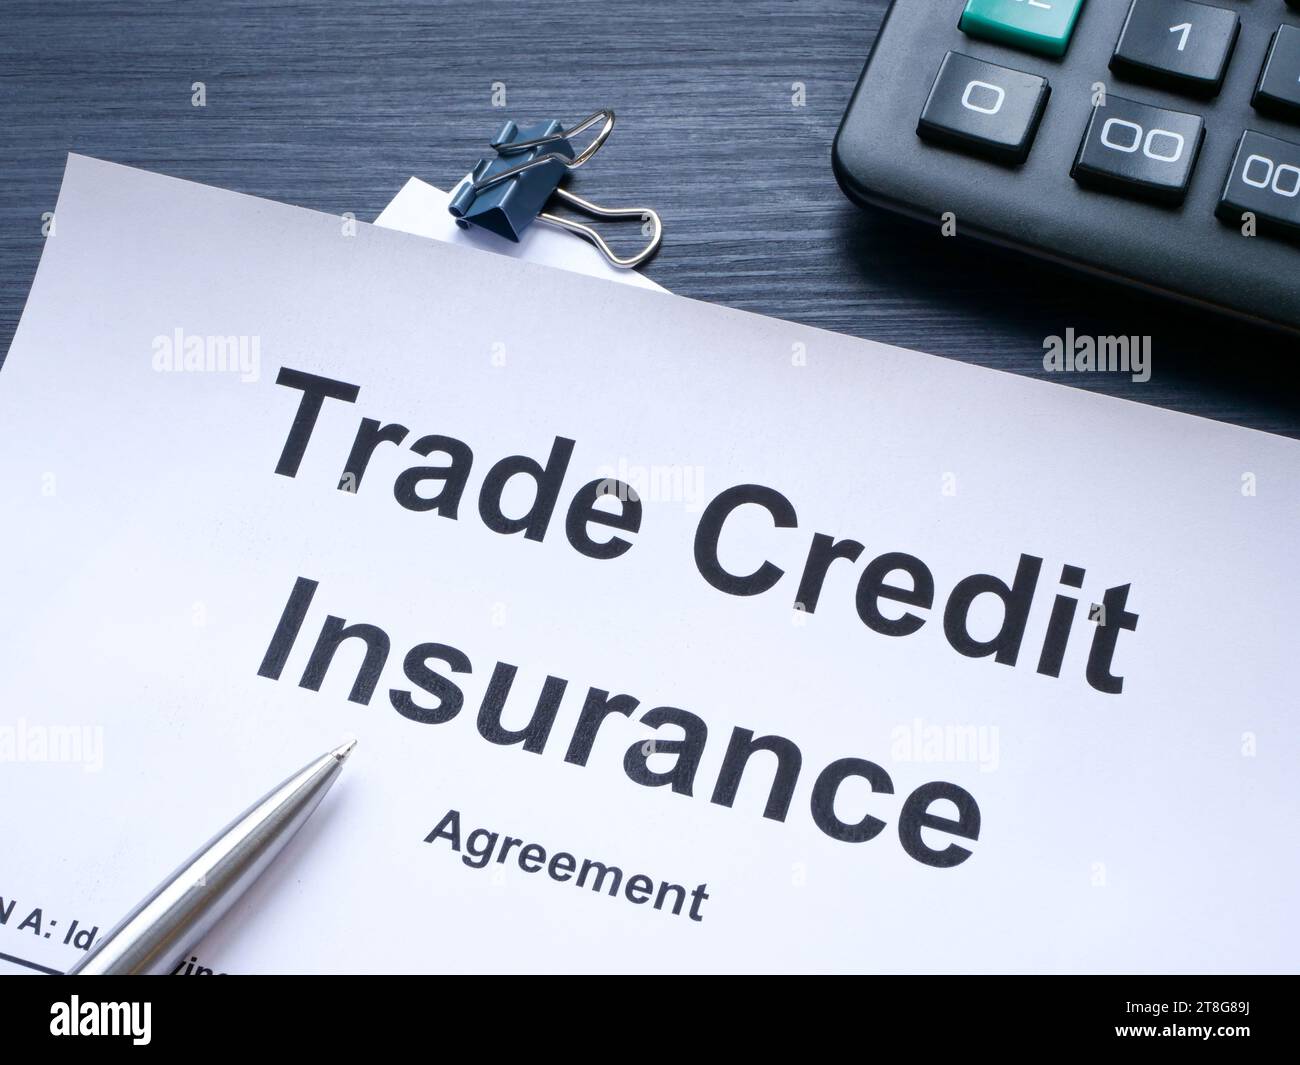 Trade credit insurance agreement and pen. Stock Photo